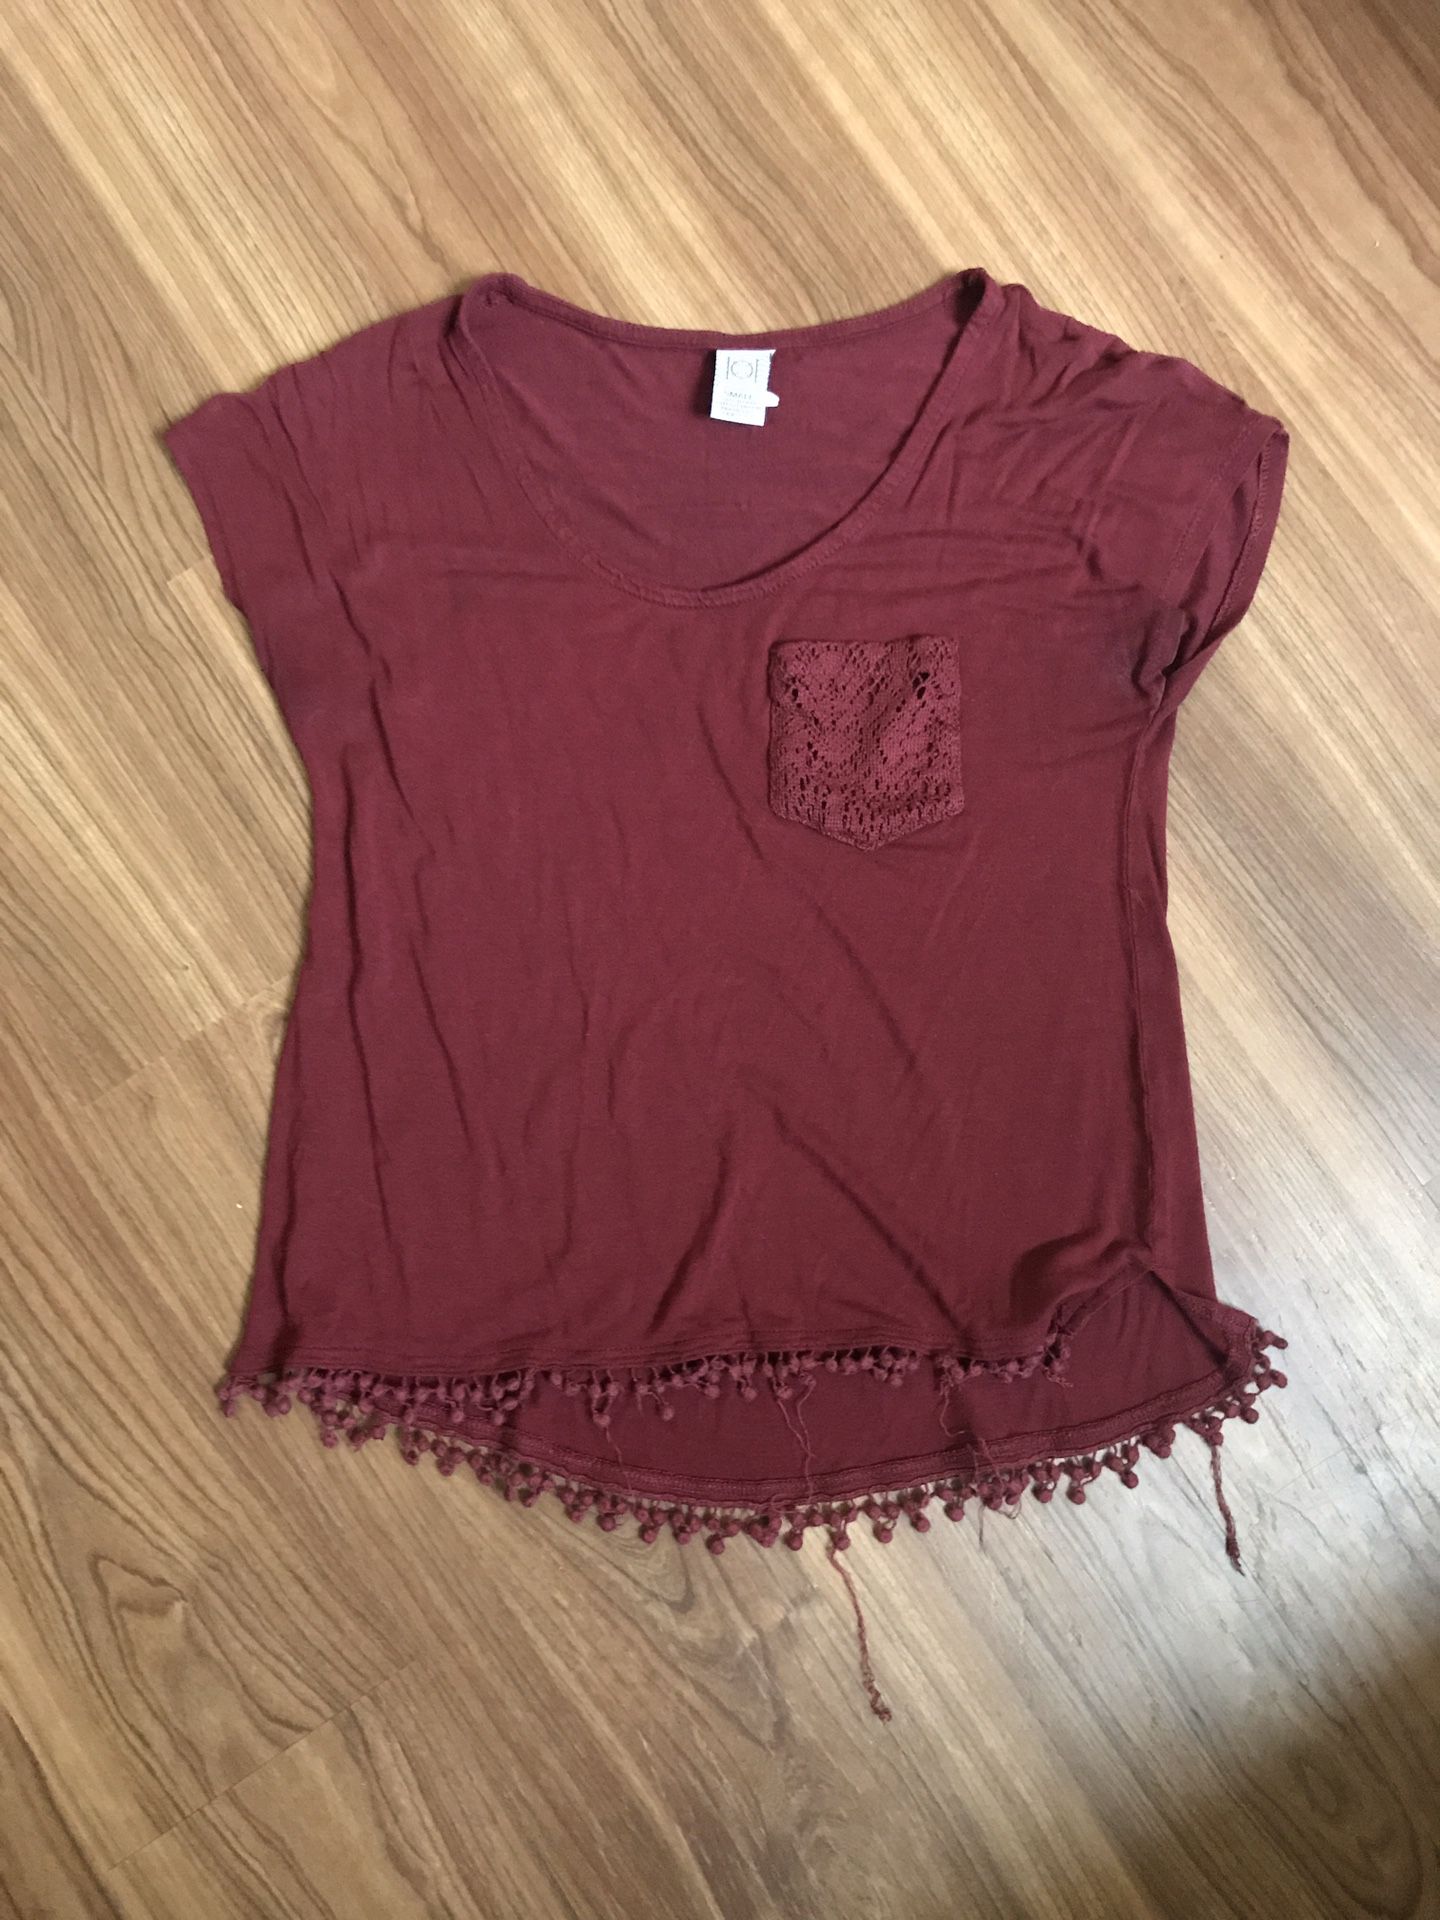 Maroon slightly cropped tee small